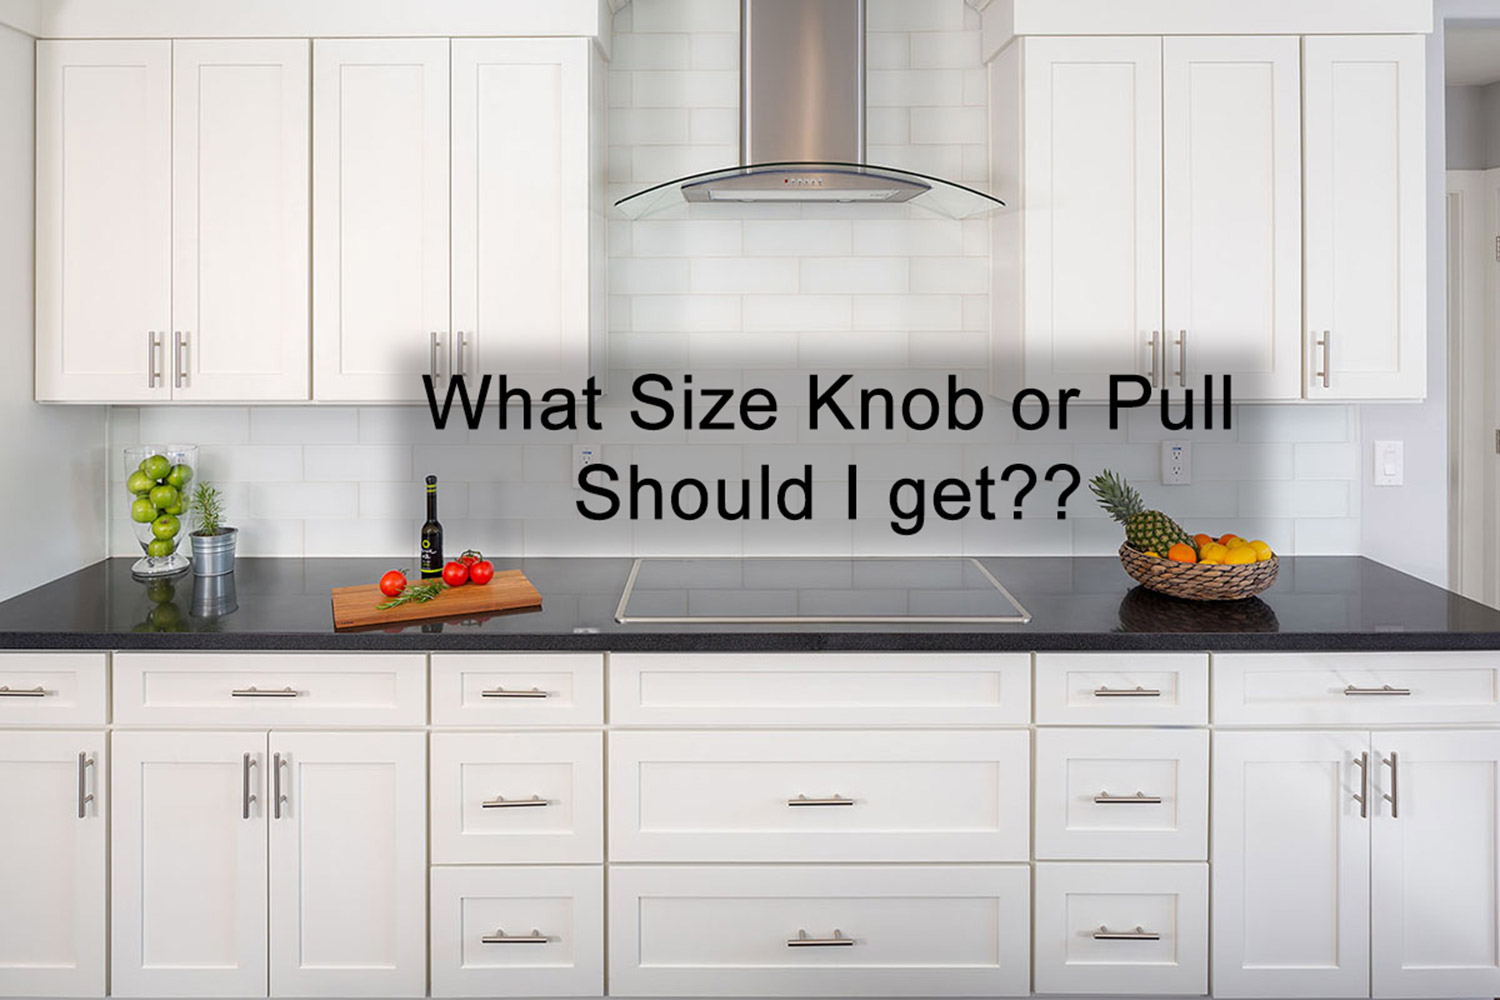 What size knob or pull should I get? - The Knob Shop